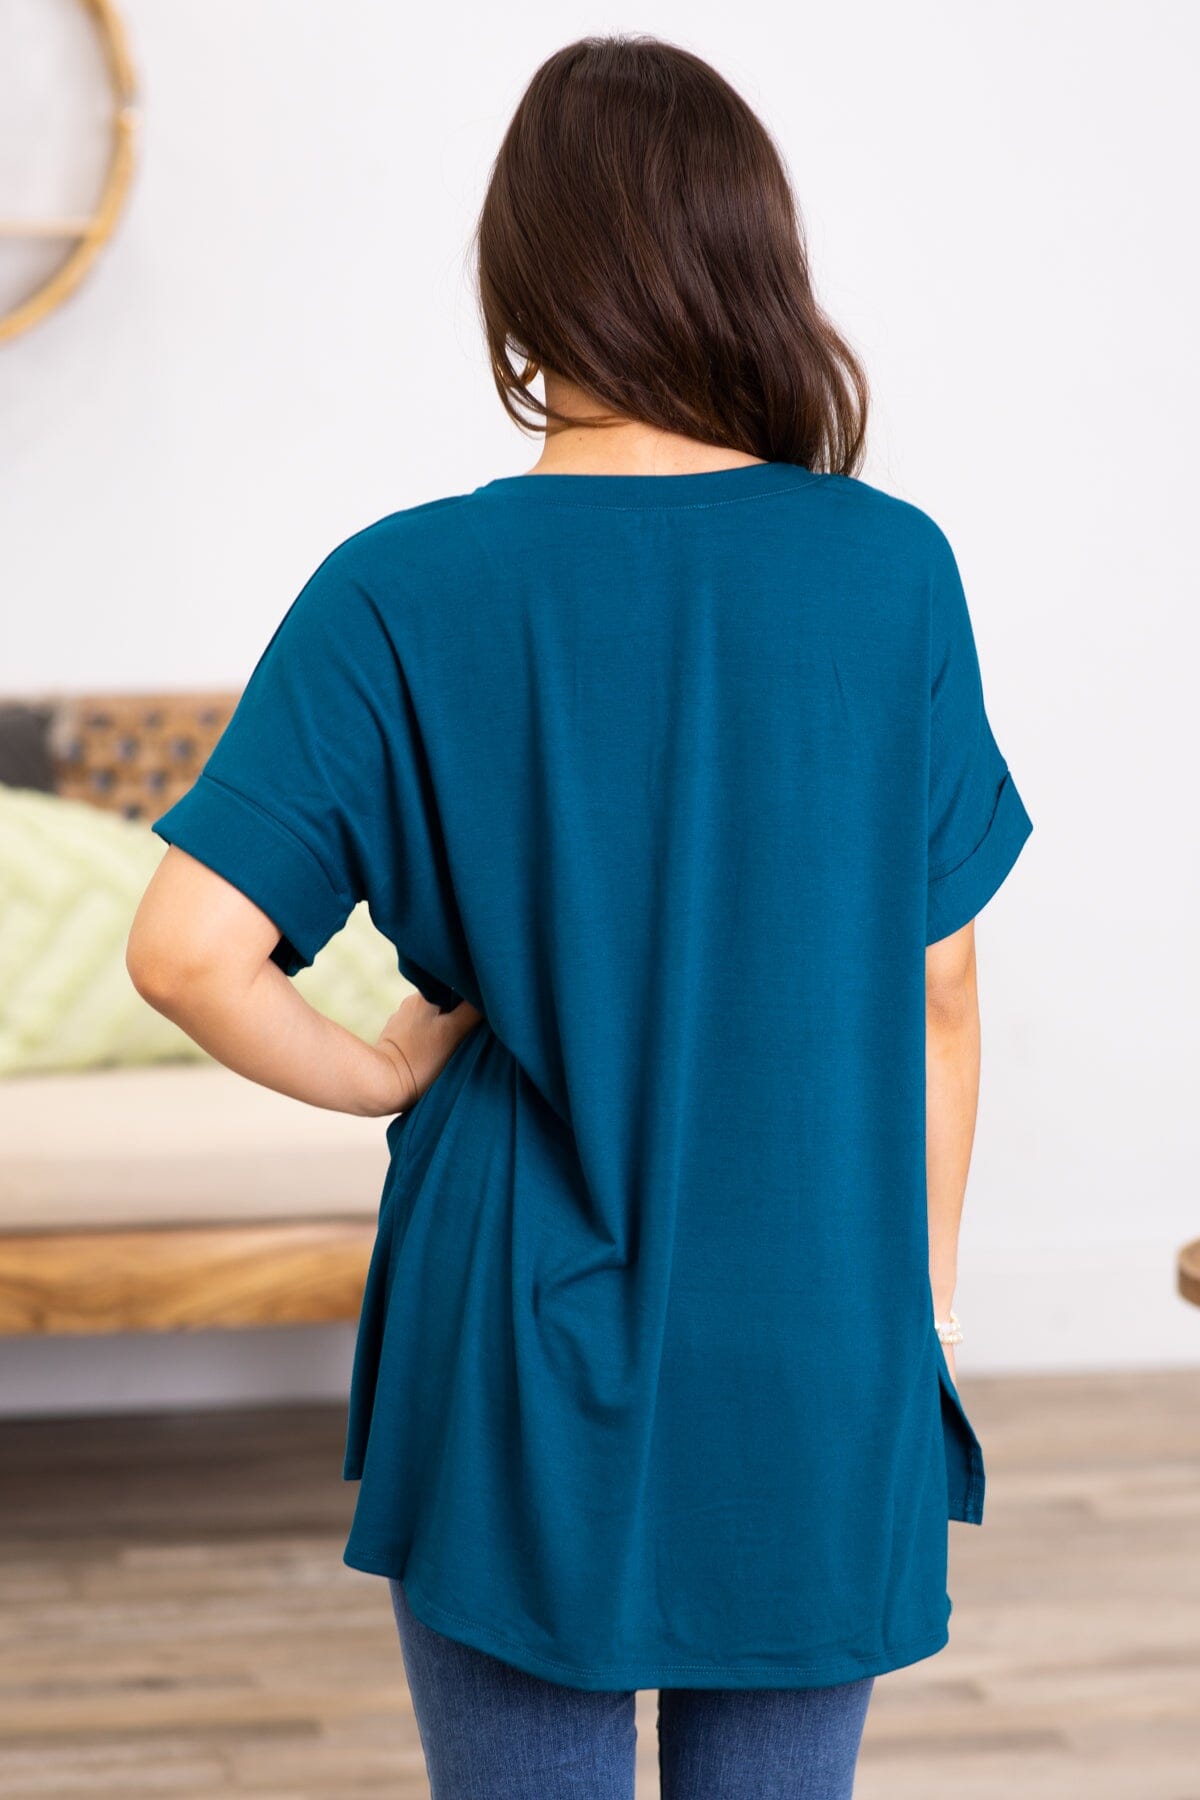 Teal V-Neck Top With Side Slits - Filly Flair